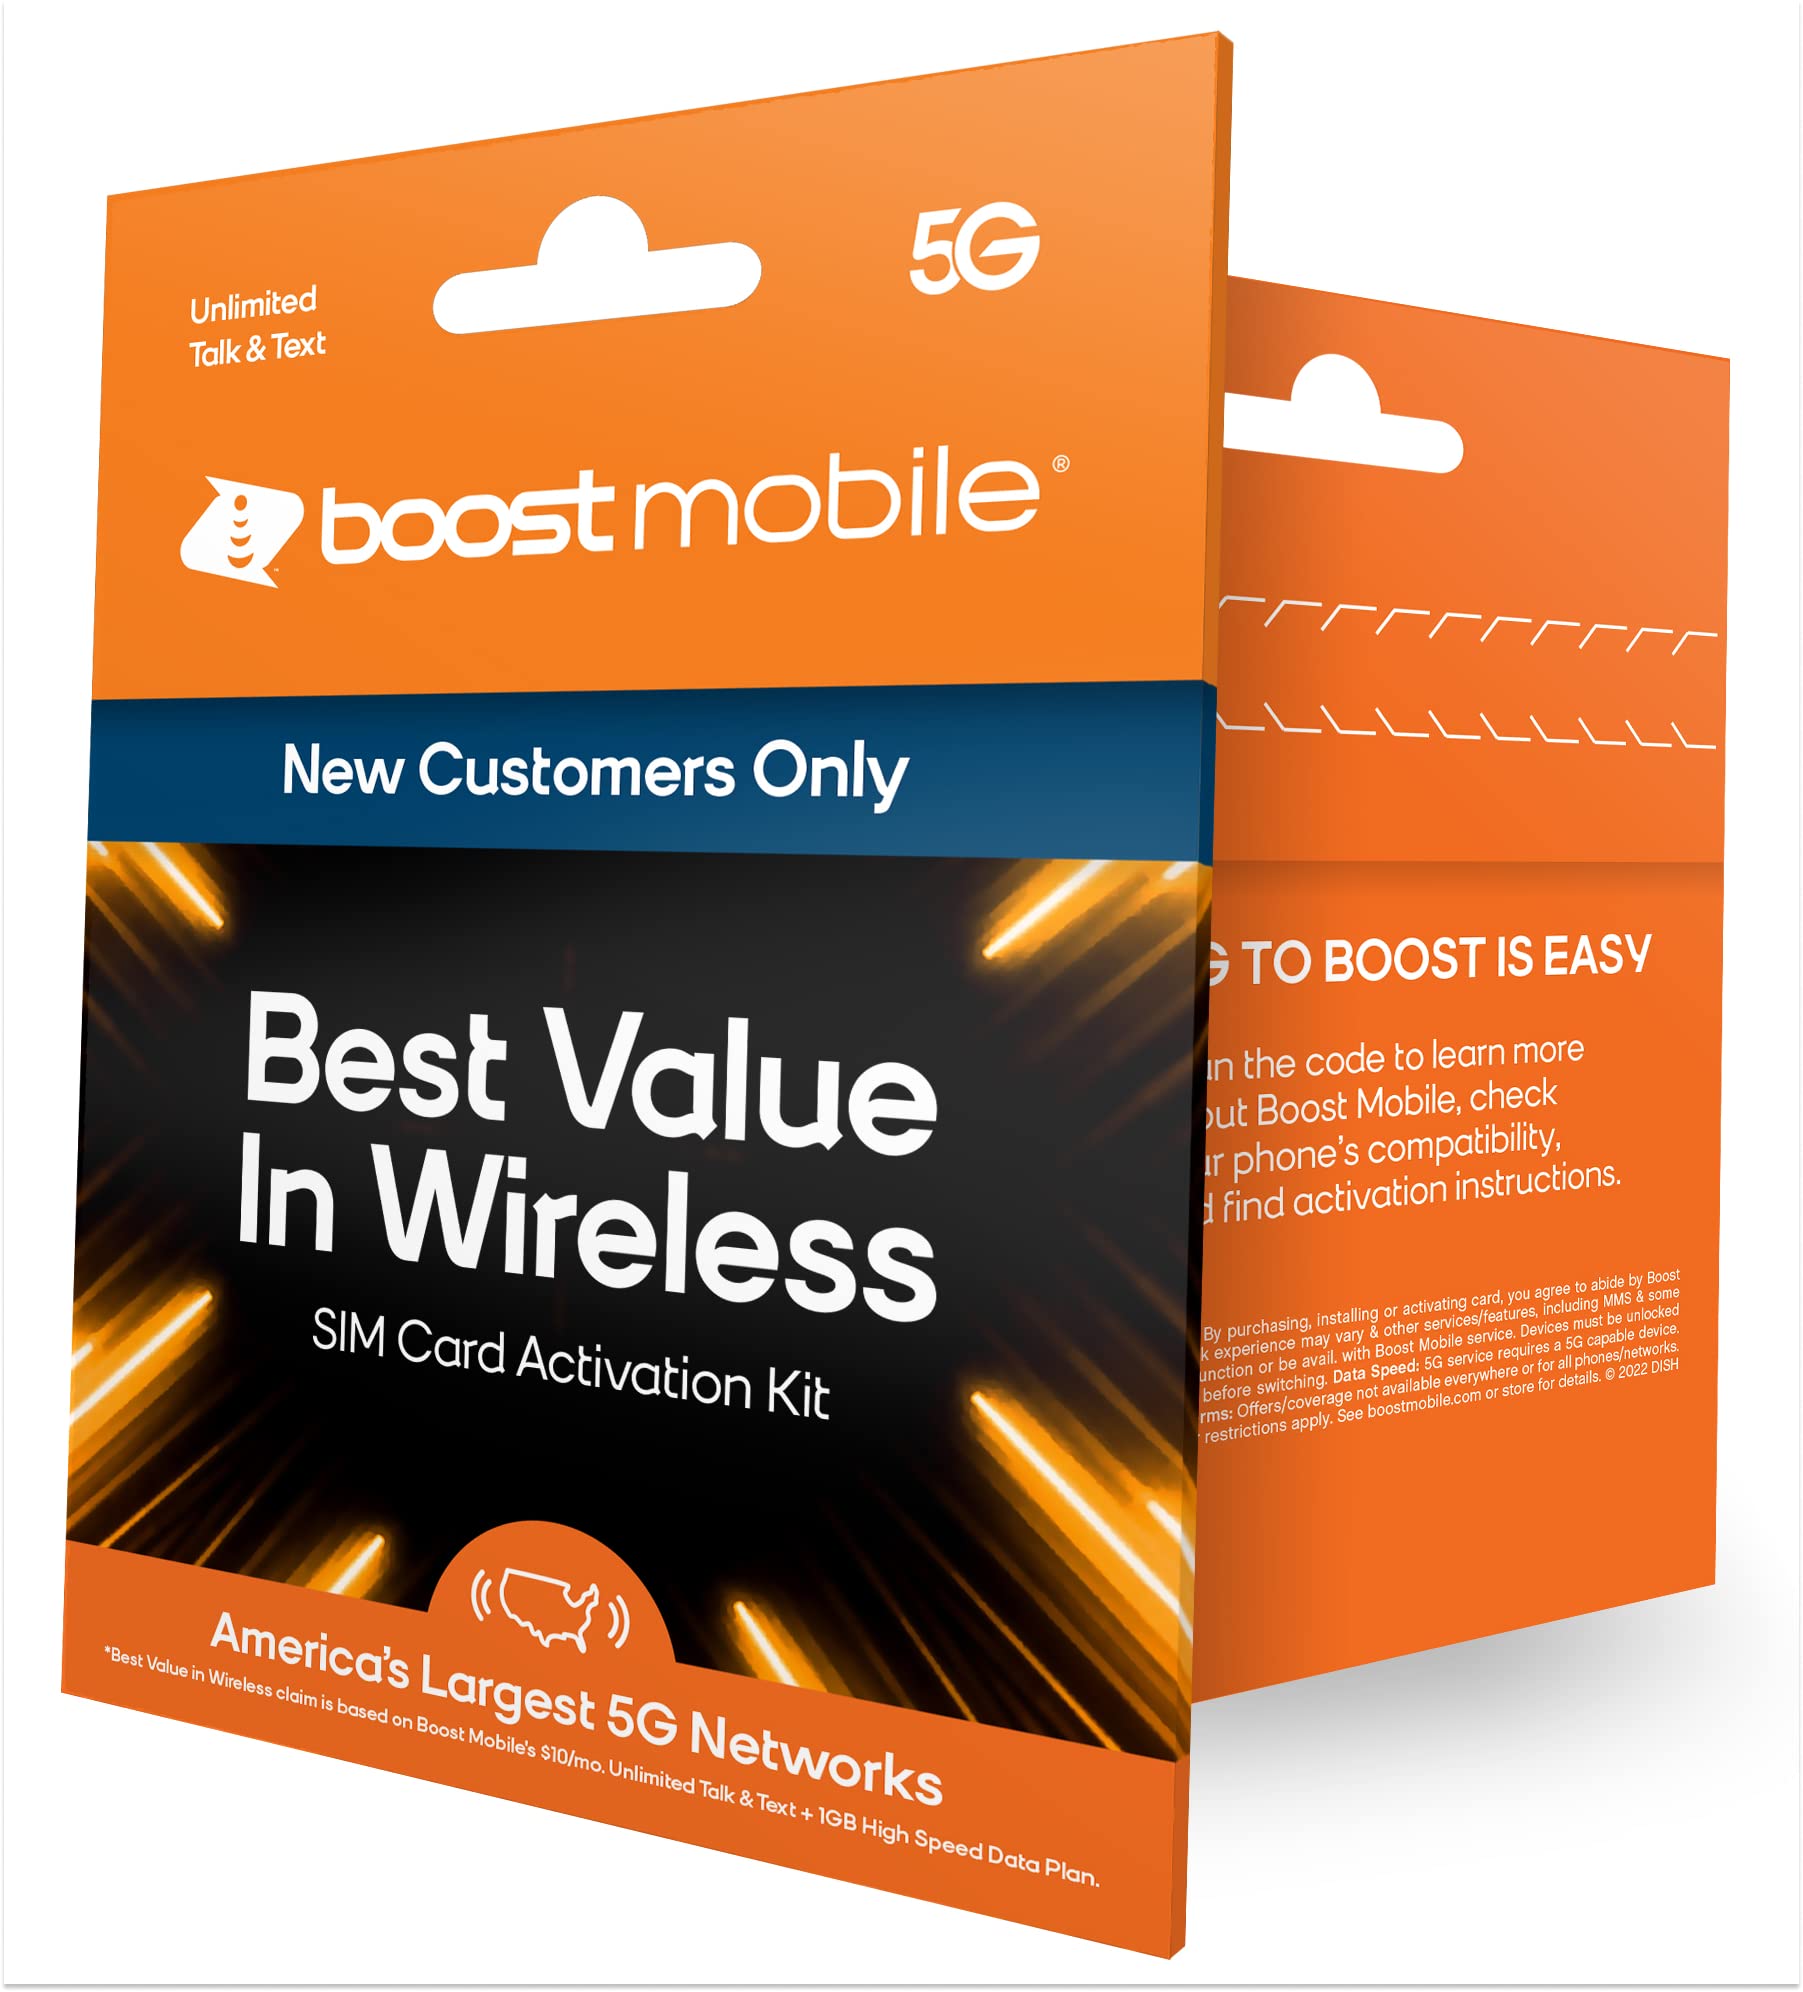 7-Eleven Offers Boost Mobile Services - CStore Decisions